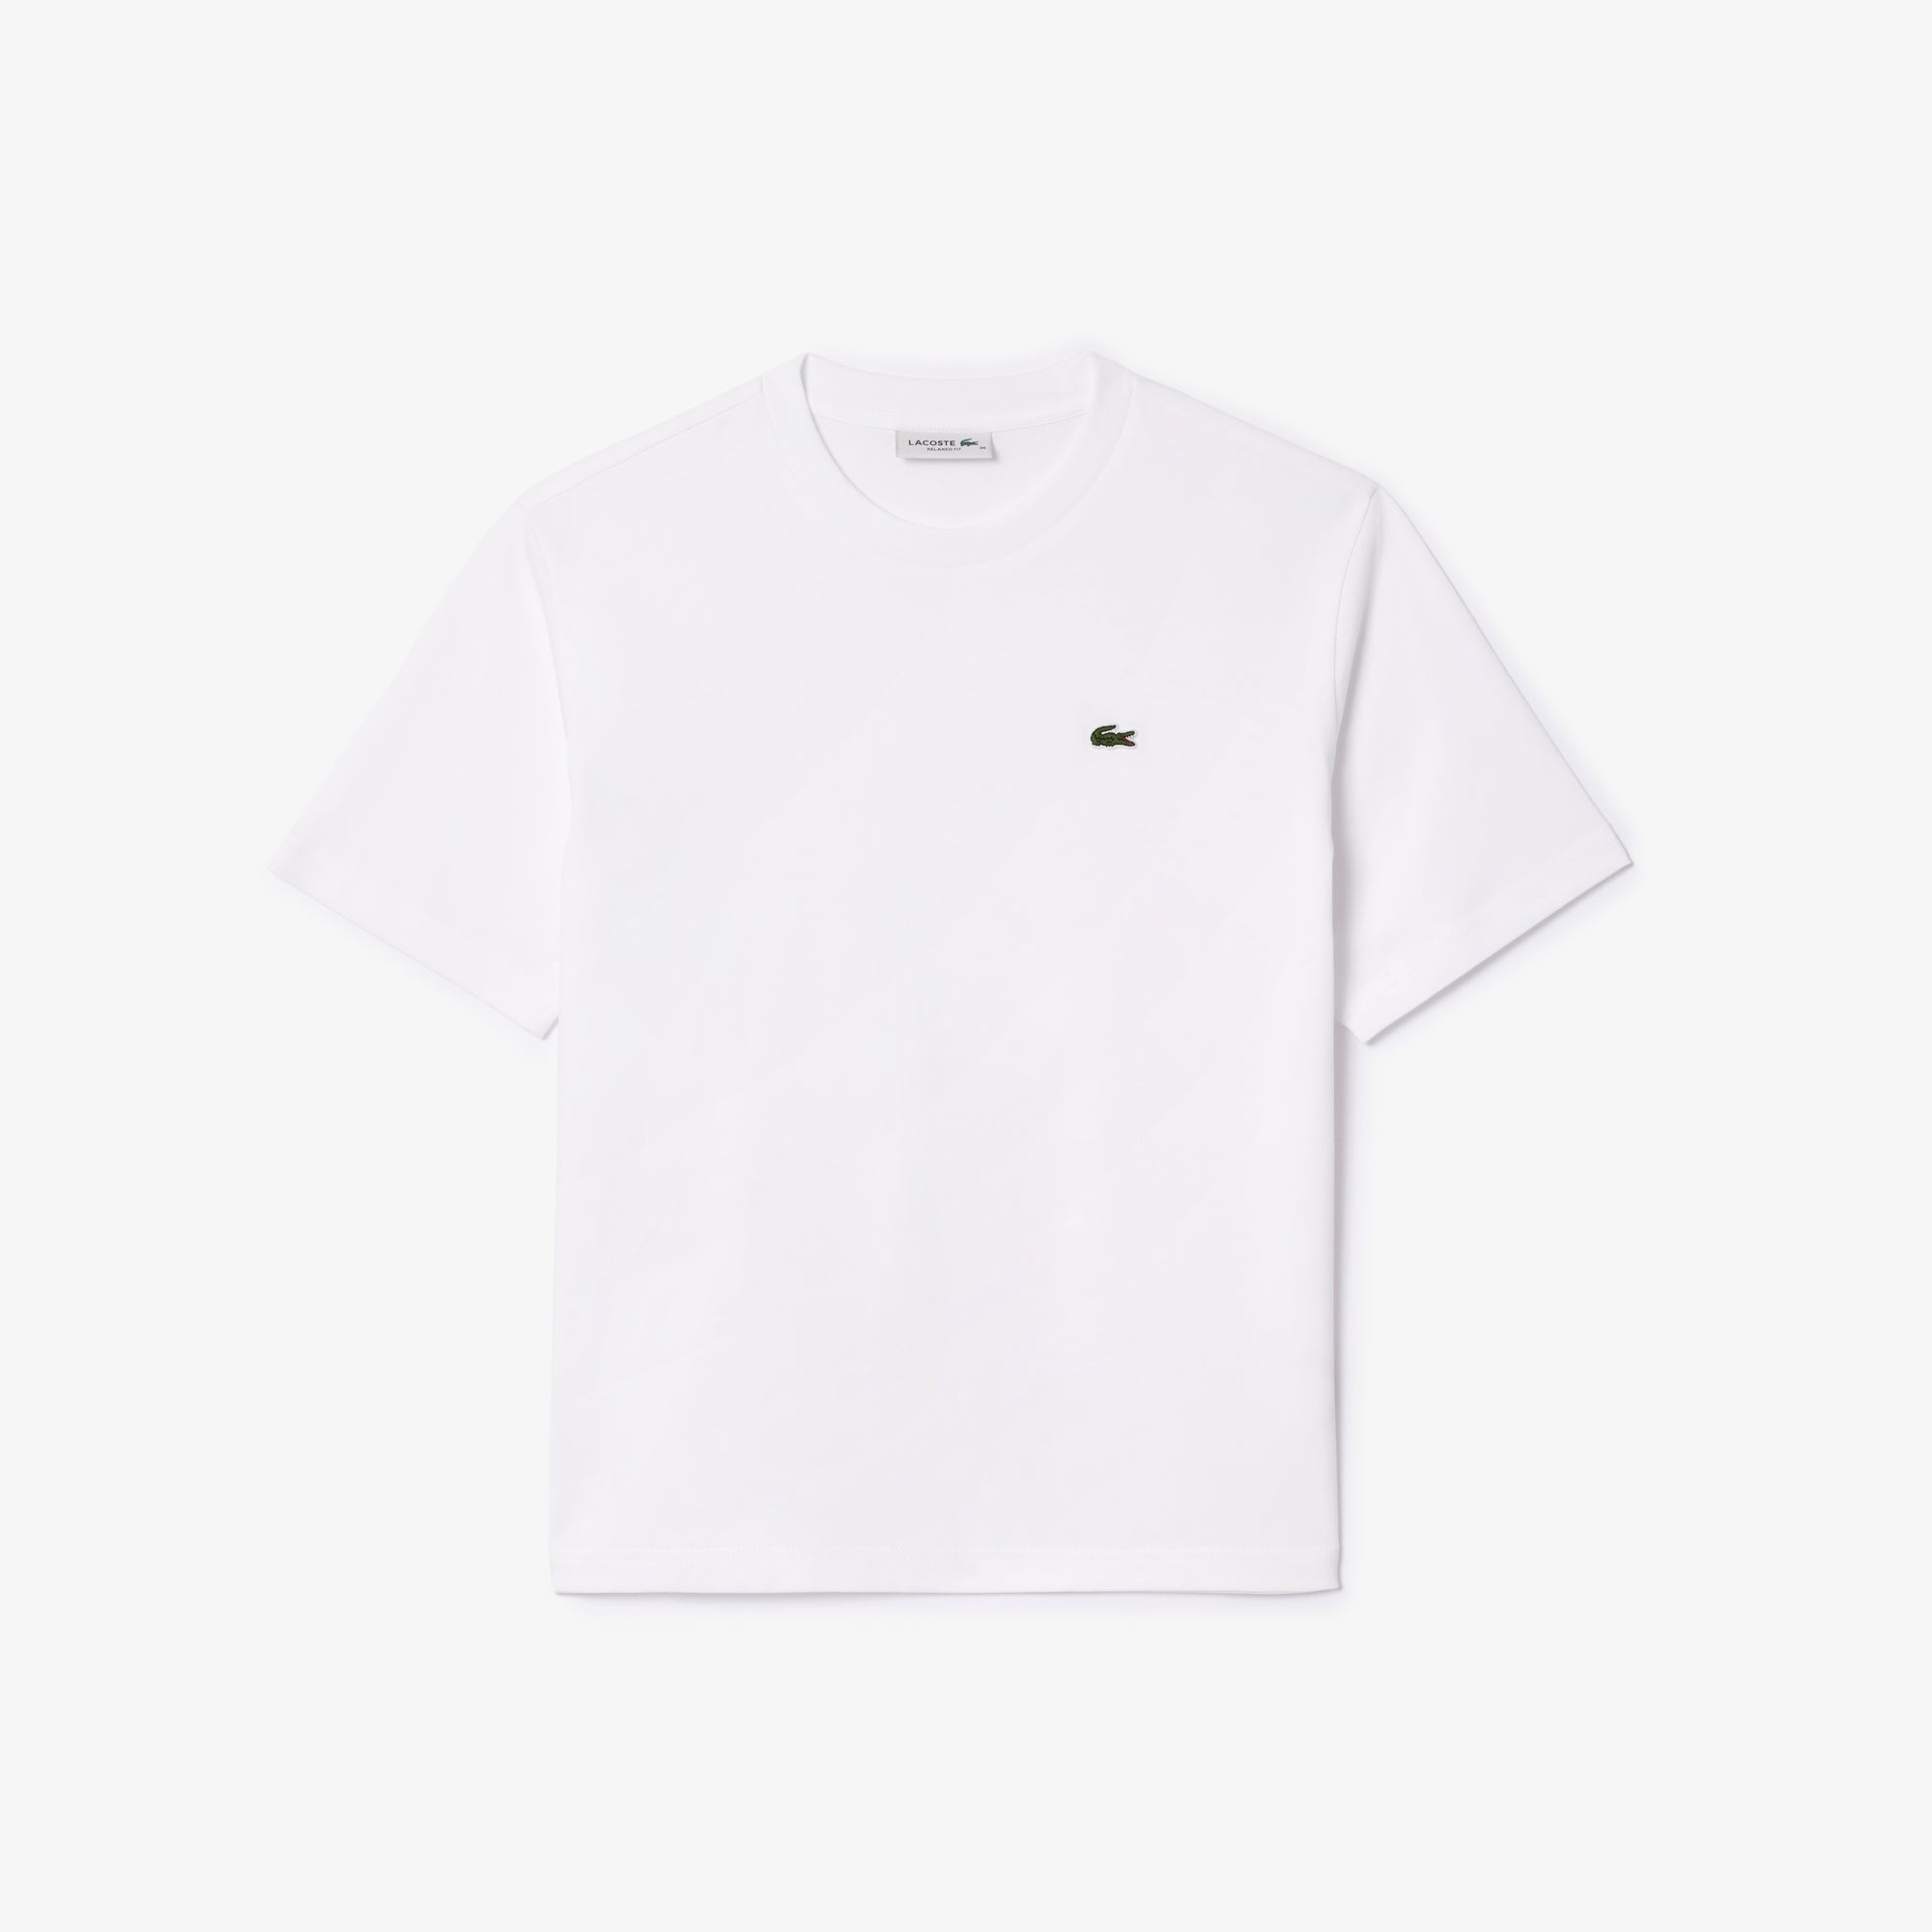 LACOSTE T-shirt Donna Bianco